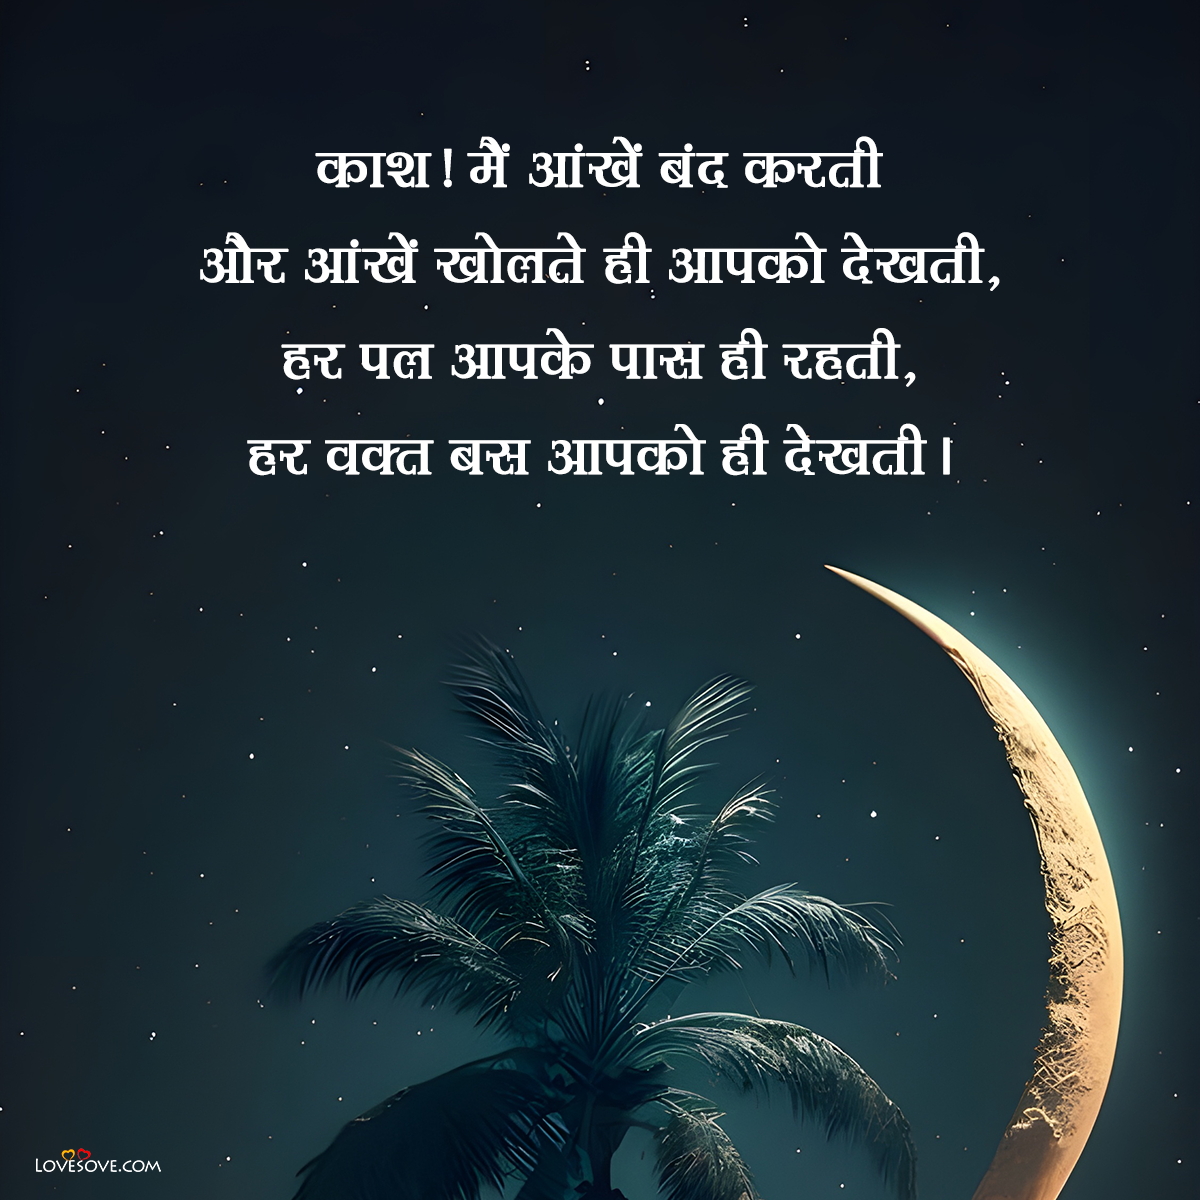 100+ Heart Touching Miss You Shayari, Miss You Quotes for Parents in Hindi